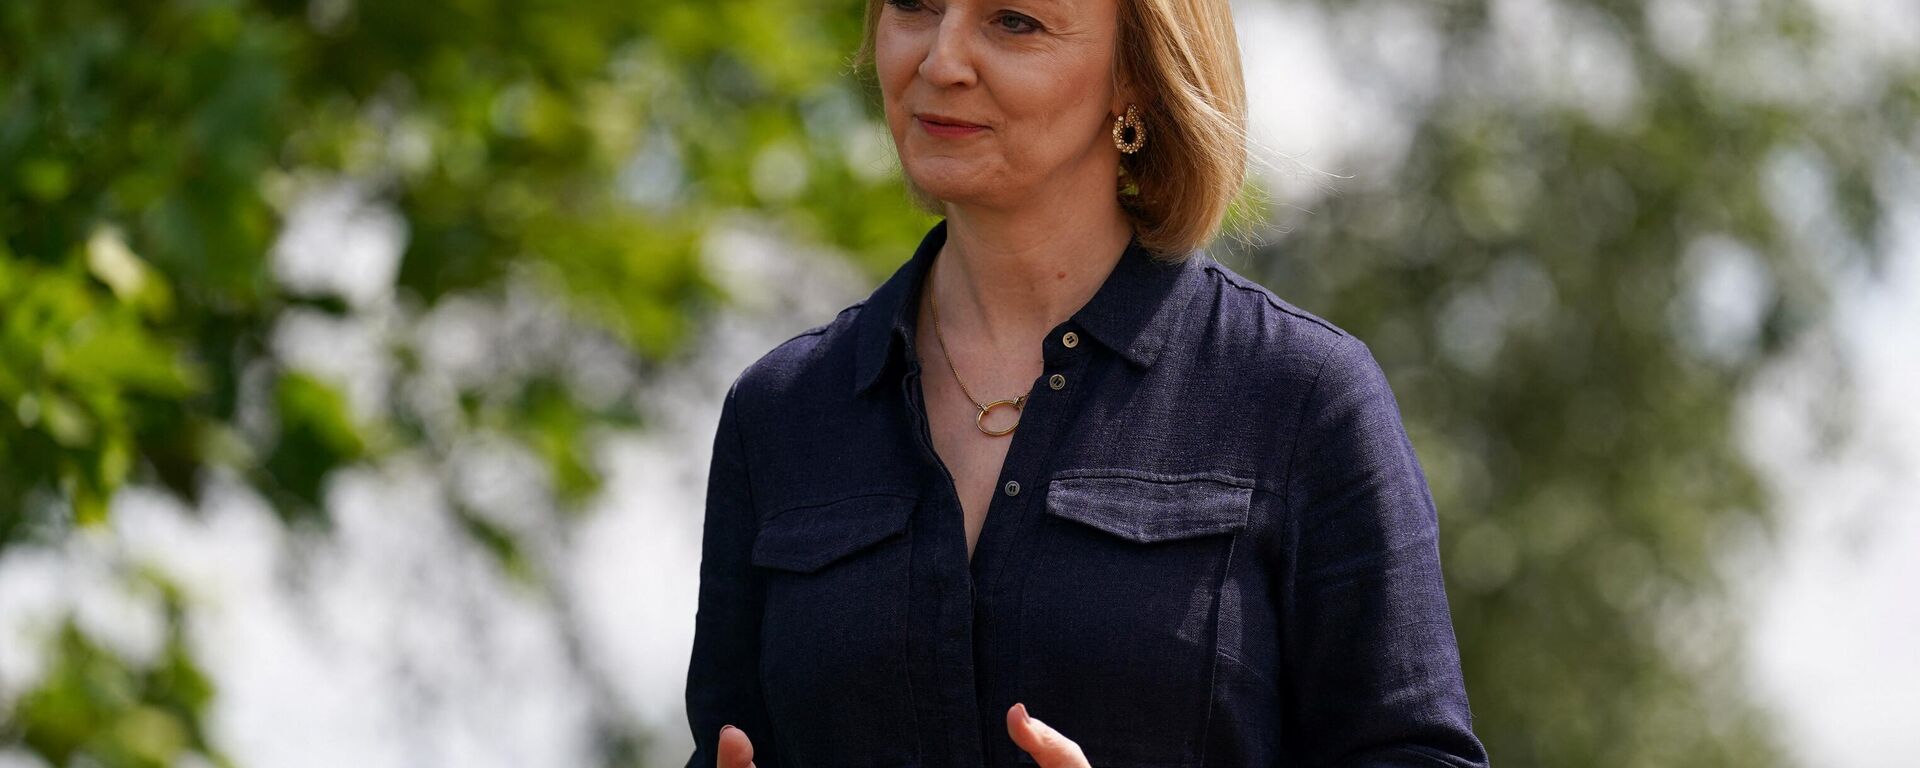 Contender to become the country's next Prime minister and leader of the Conservative party British Foreign Secretary Liz Truss speaks at an event at the Breckland Council in Dereham, Norfolk, on July 29, 2022 - Sputnik International, 1920, 04.09.2022